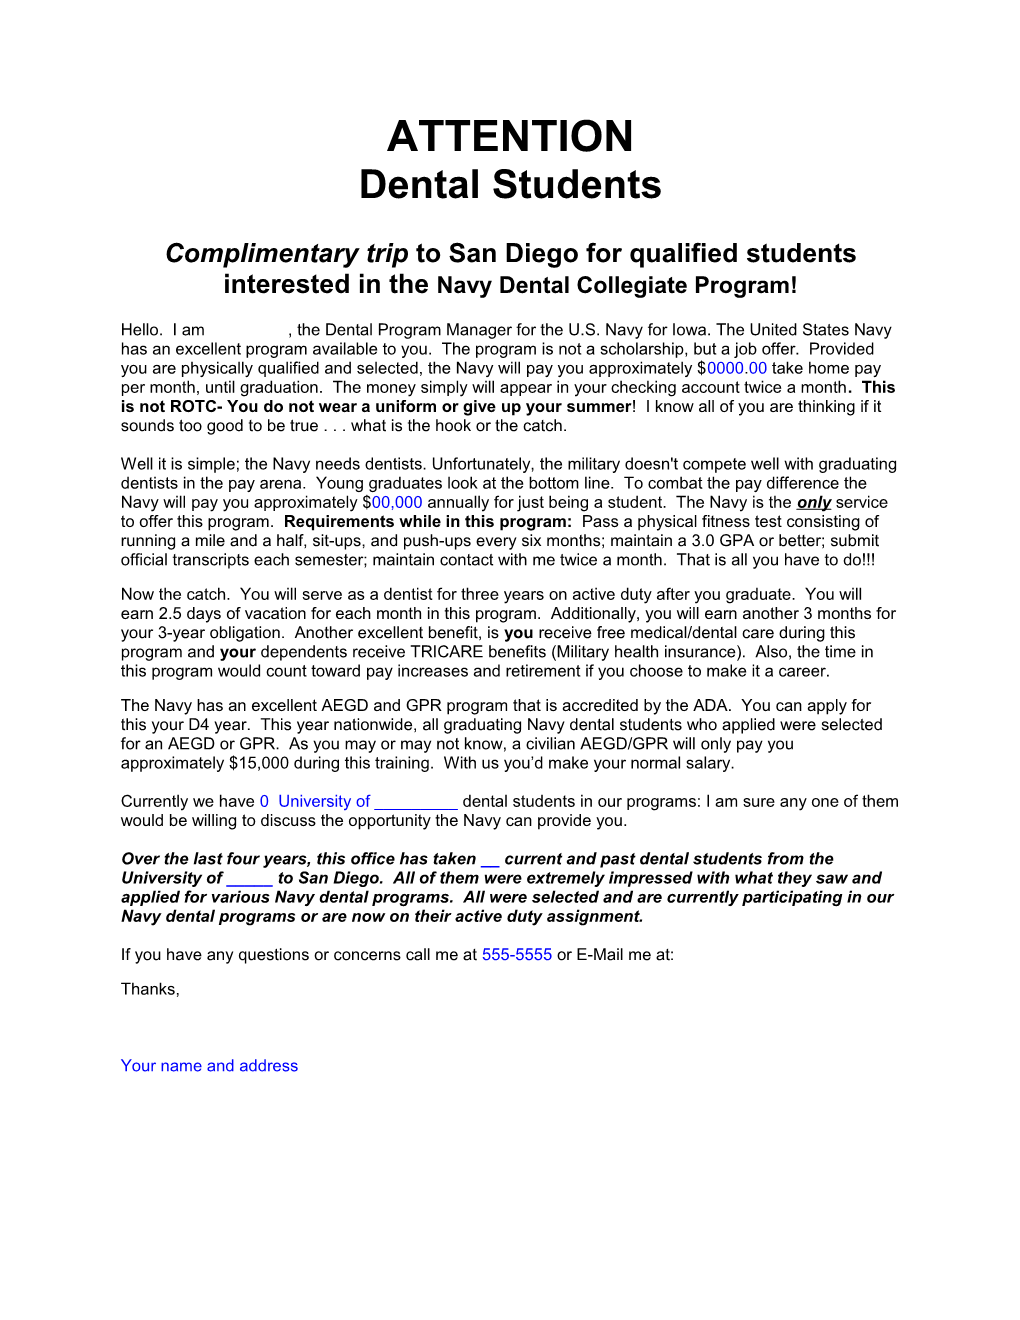 Complimentary Trip to San Diego for Qualified Students Interested in the Navy Dental Collegiate